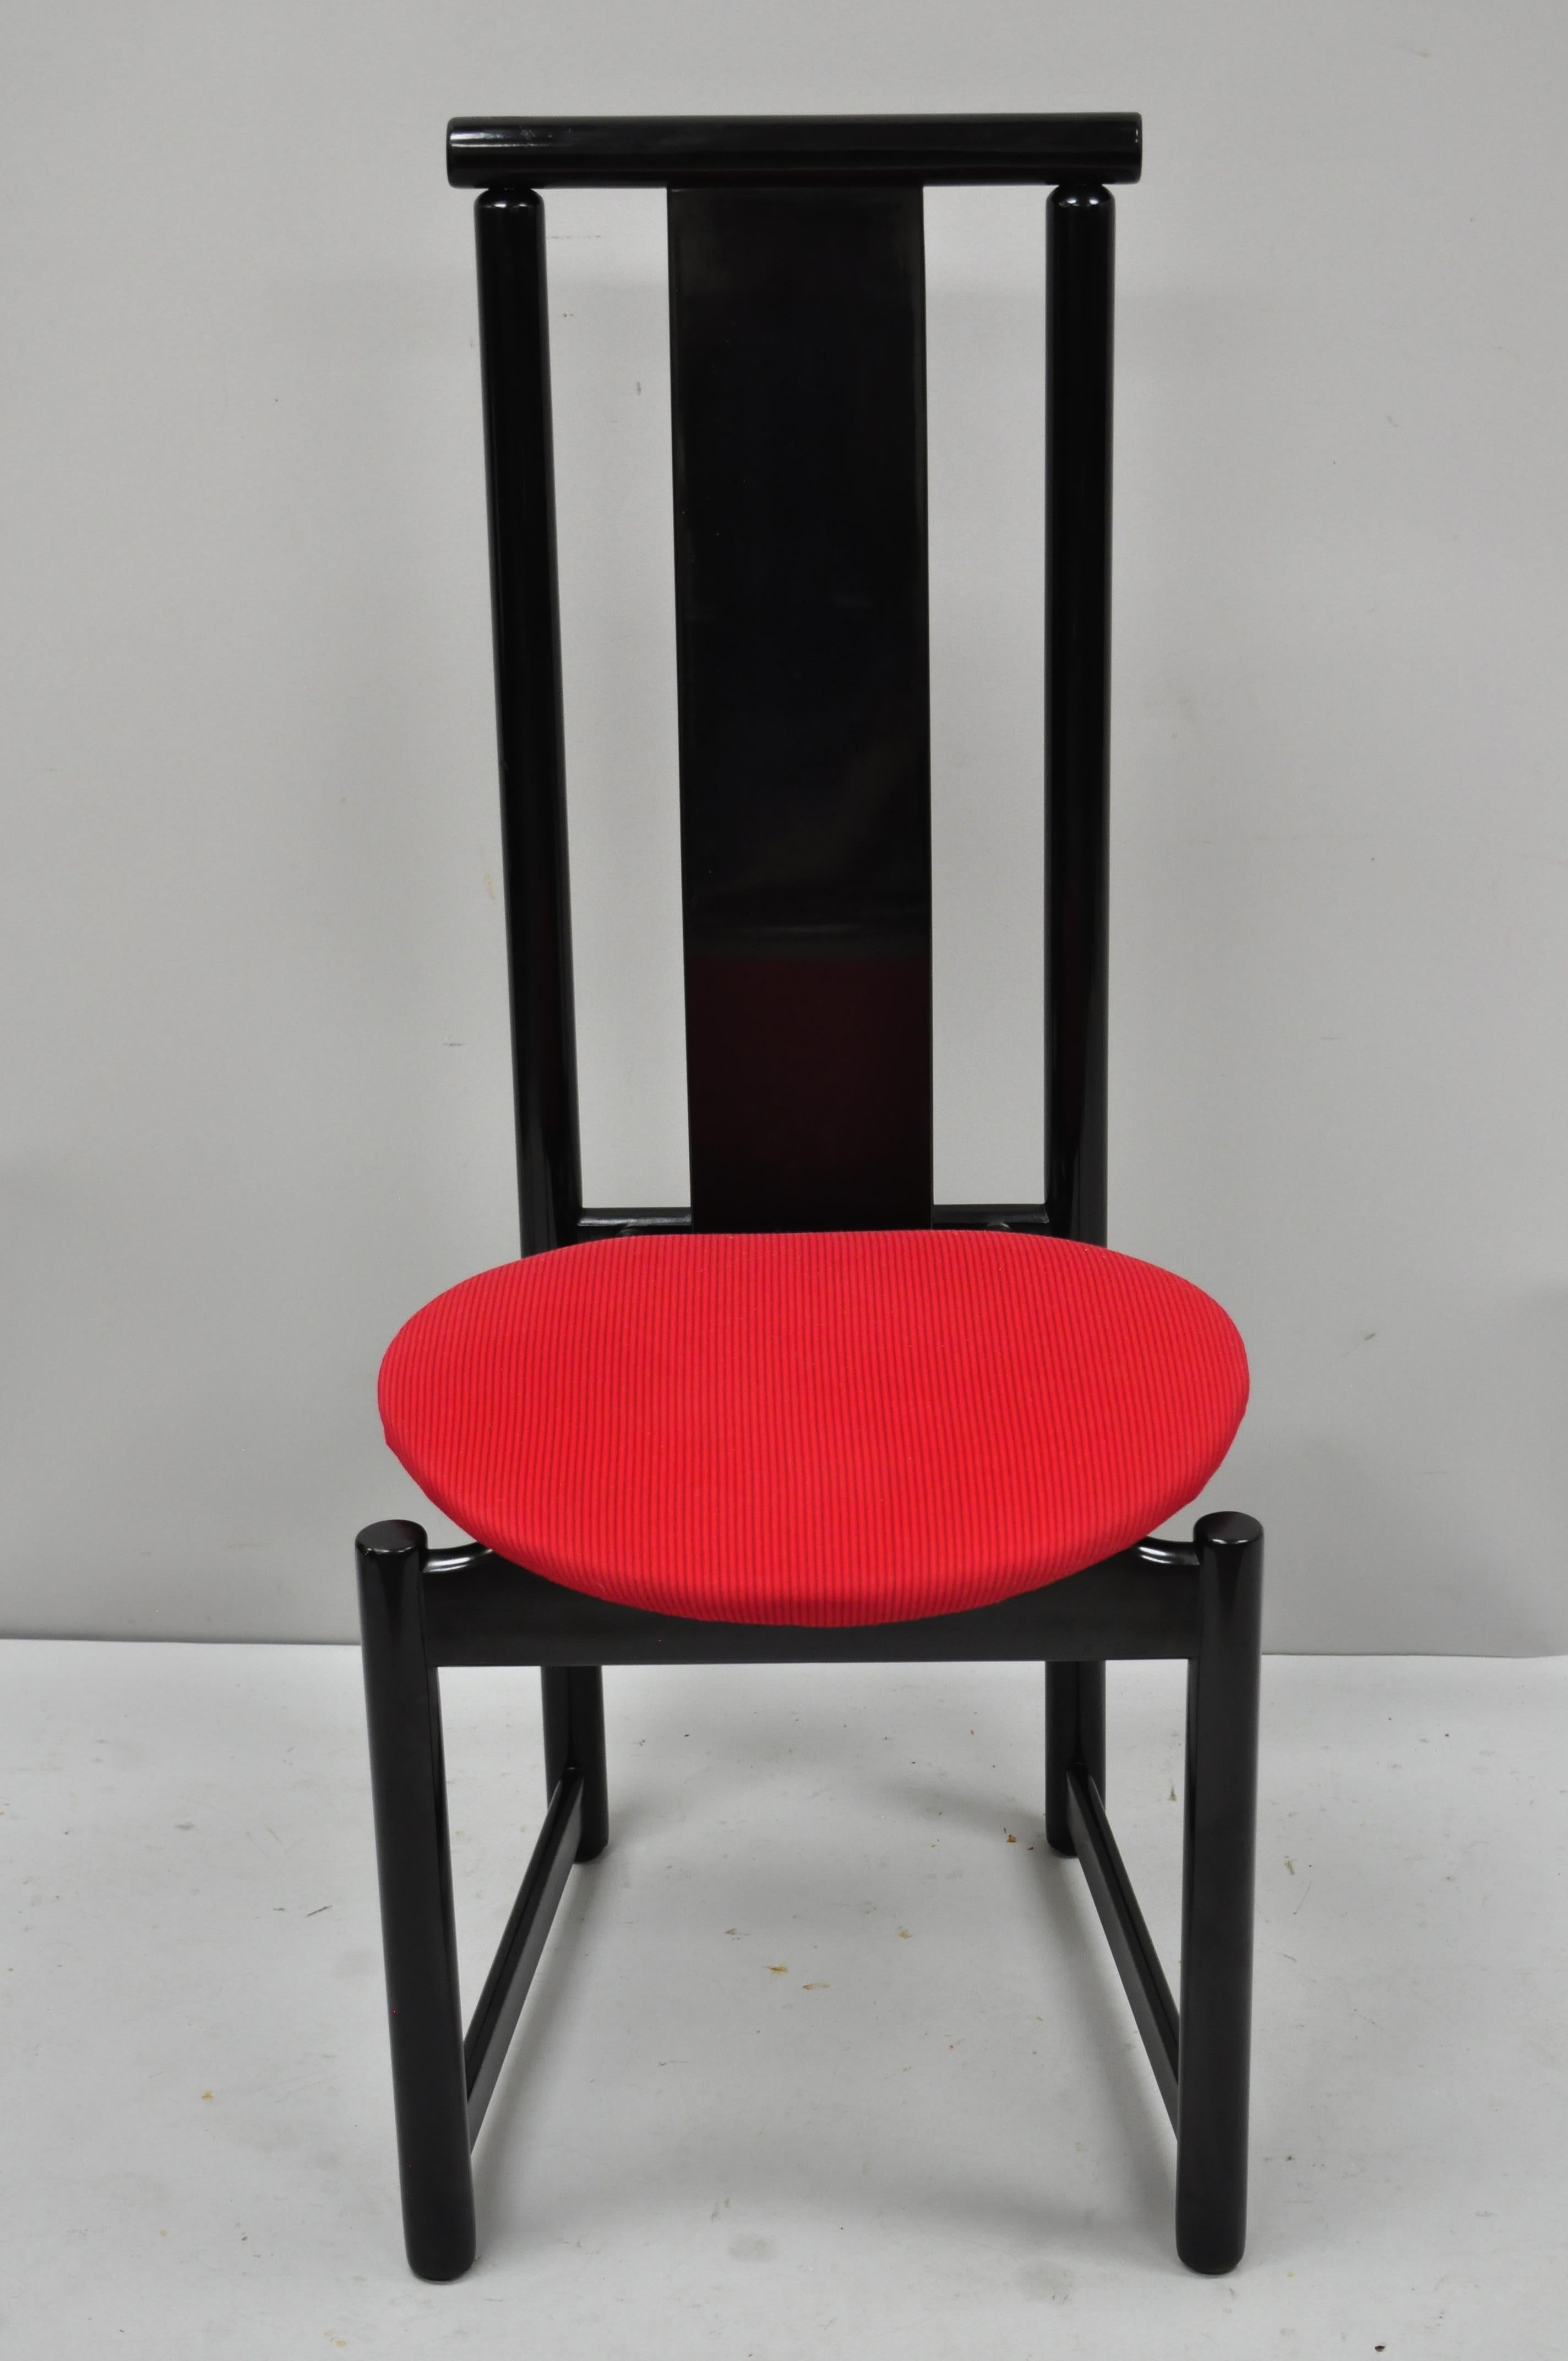 Set of 6 black lacquer post modern memphis style dining chairs red seat. Listing features (6) side chairs, black lacquer solid wood frames, red upholstered seat, sleek sculptural form. Circa late 20th century. Measurements: 39.5